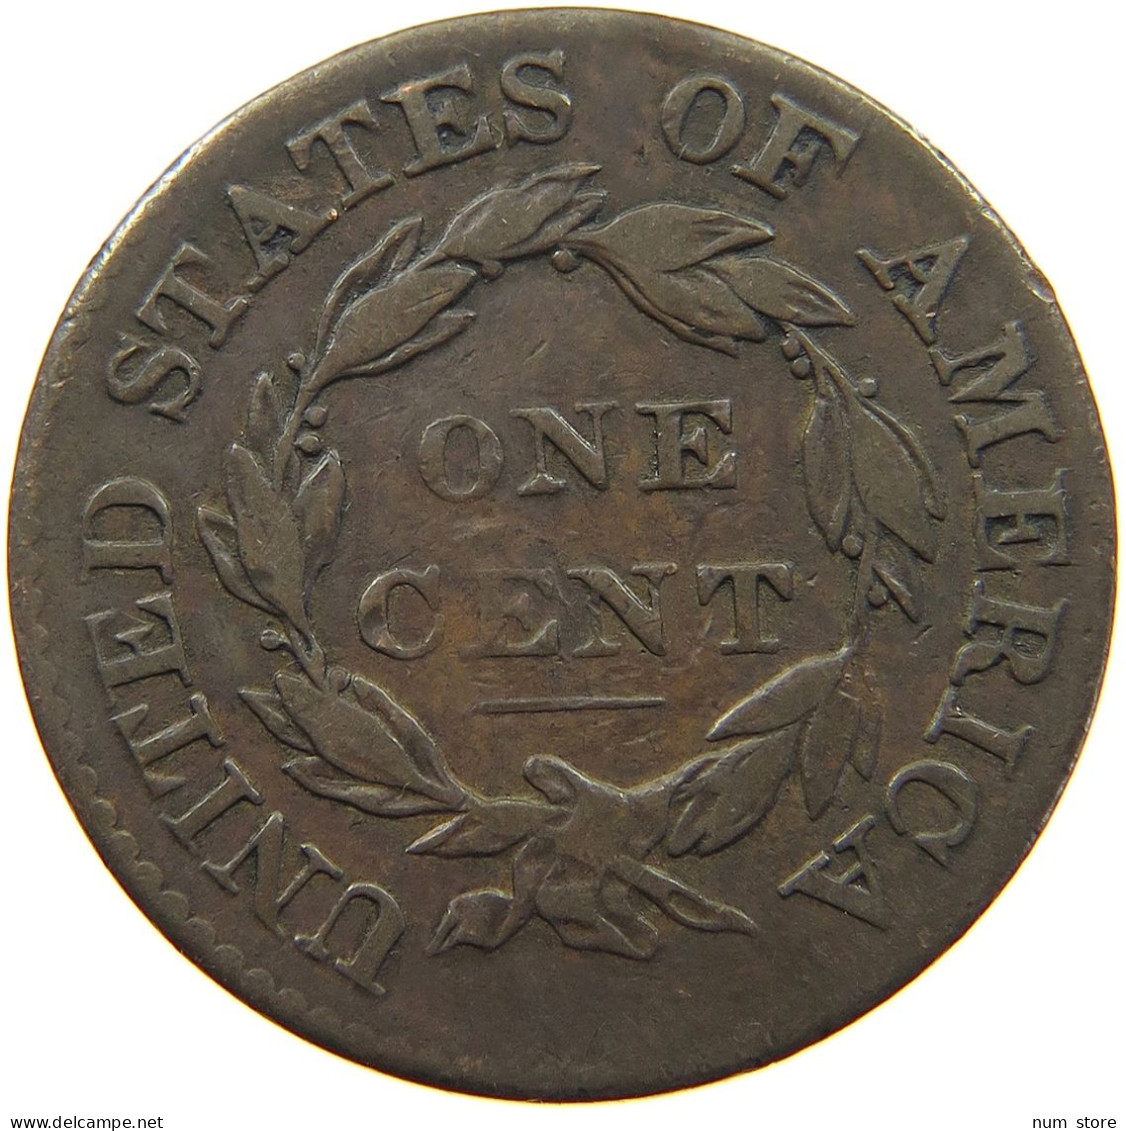 UNITED STATES OF AMERICA LARGE CENT 1825 CORONET HEAD #t077 0461 - 1816-1839: Coronet Head (Tête Couronnée)